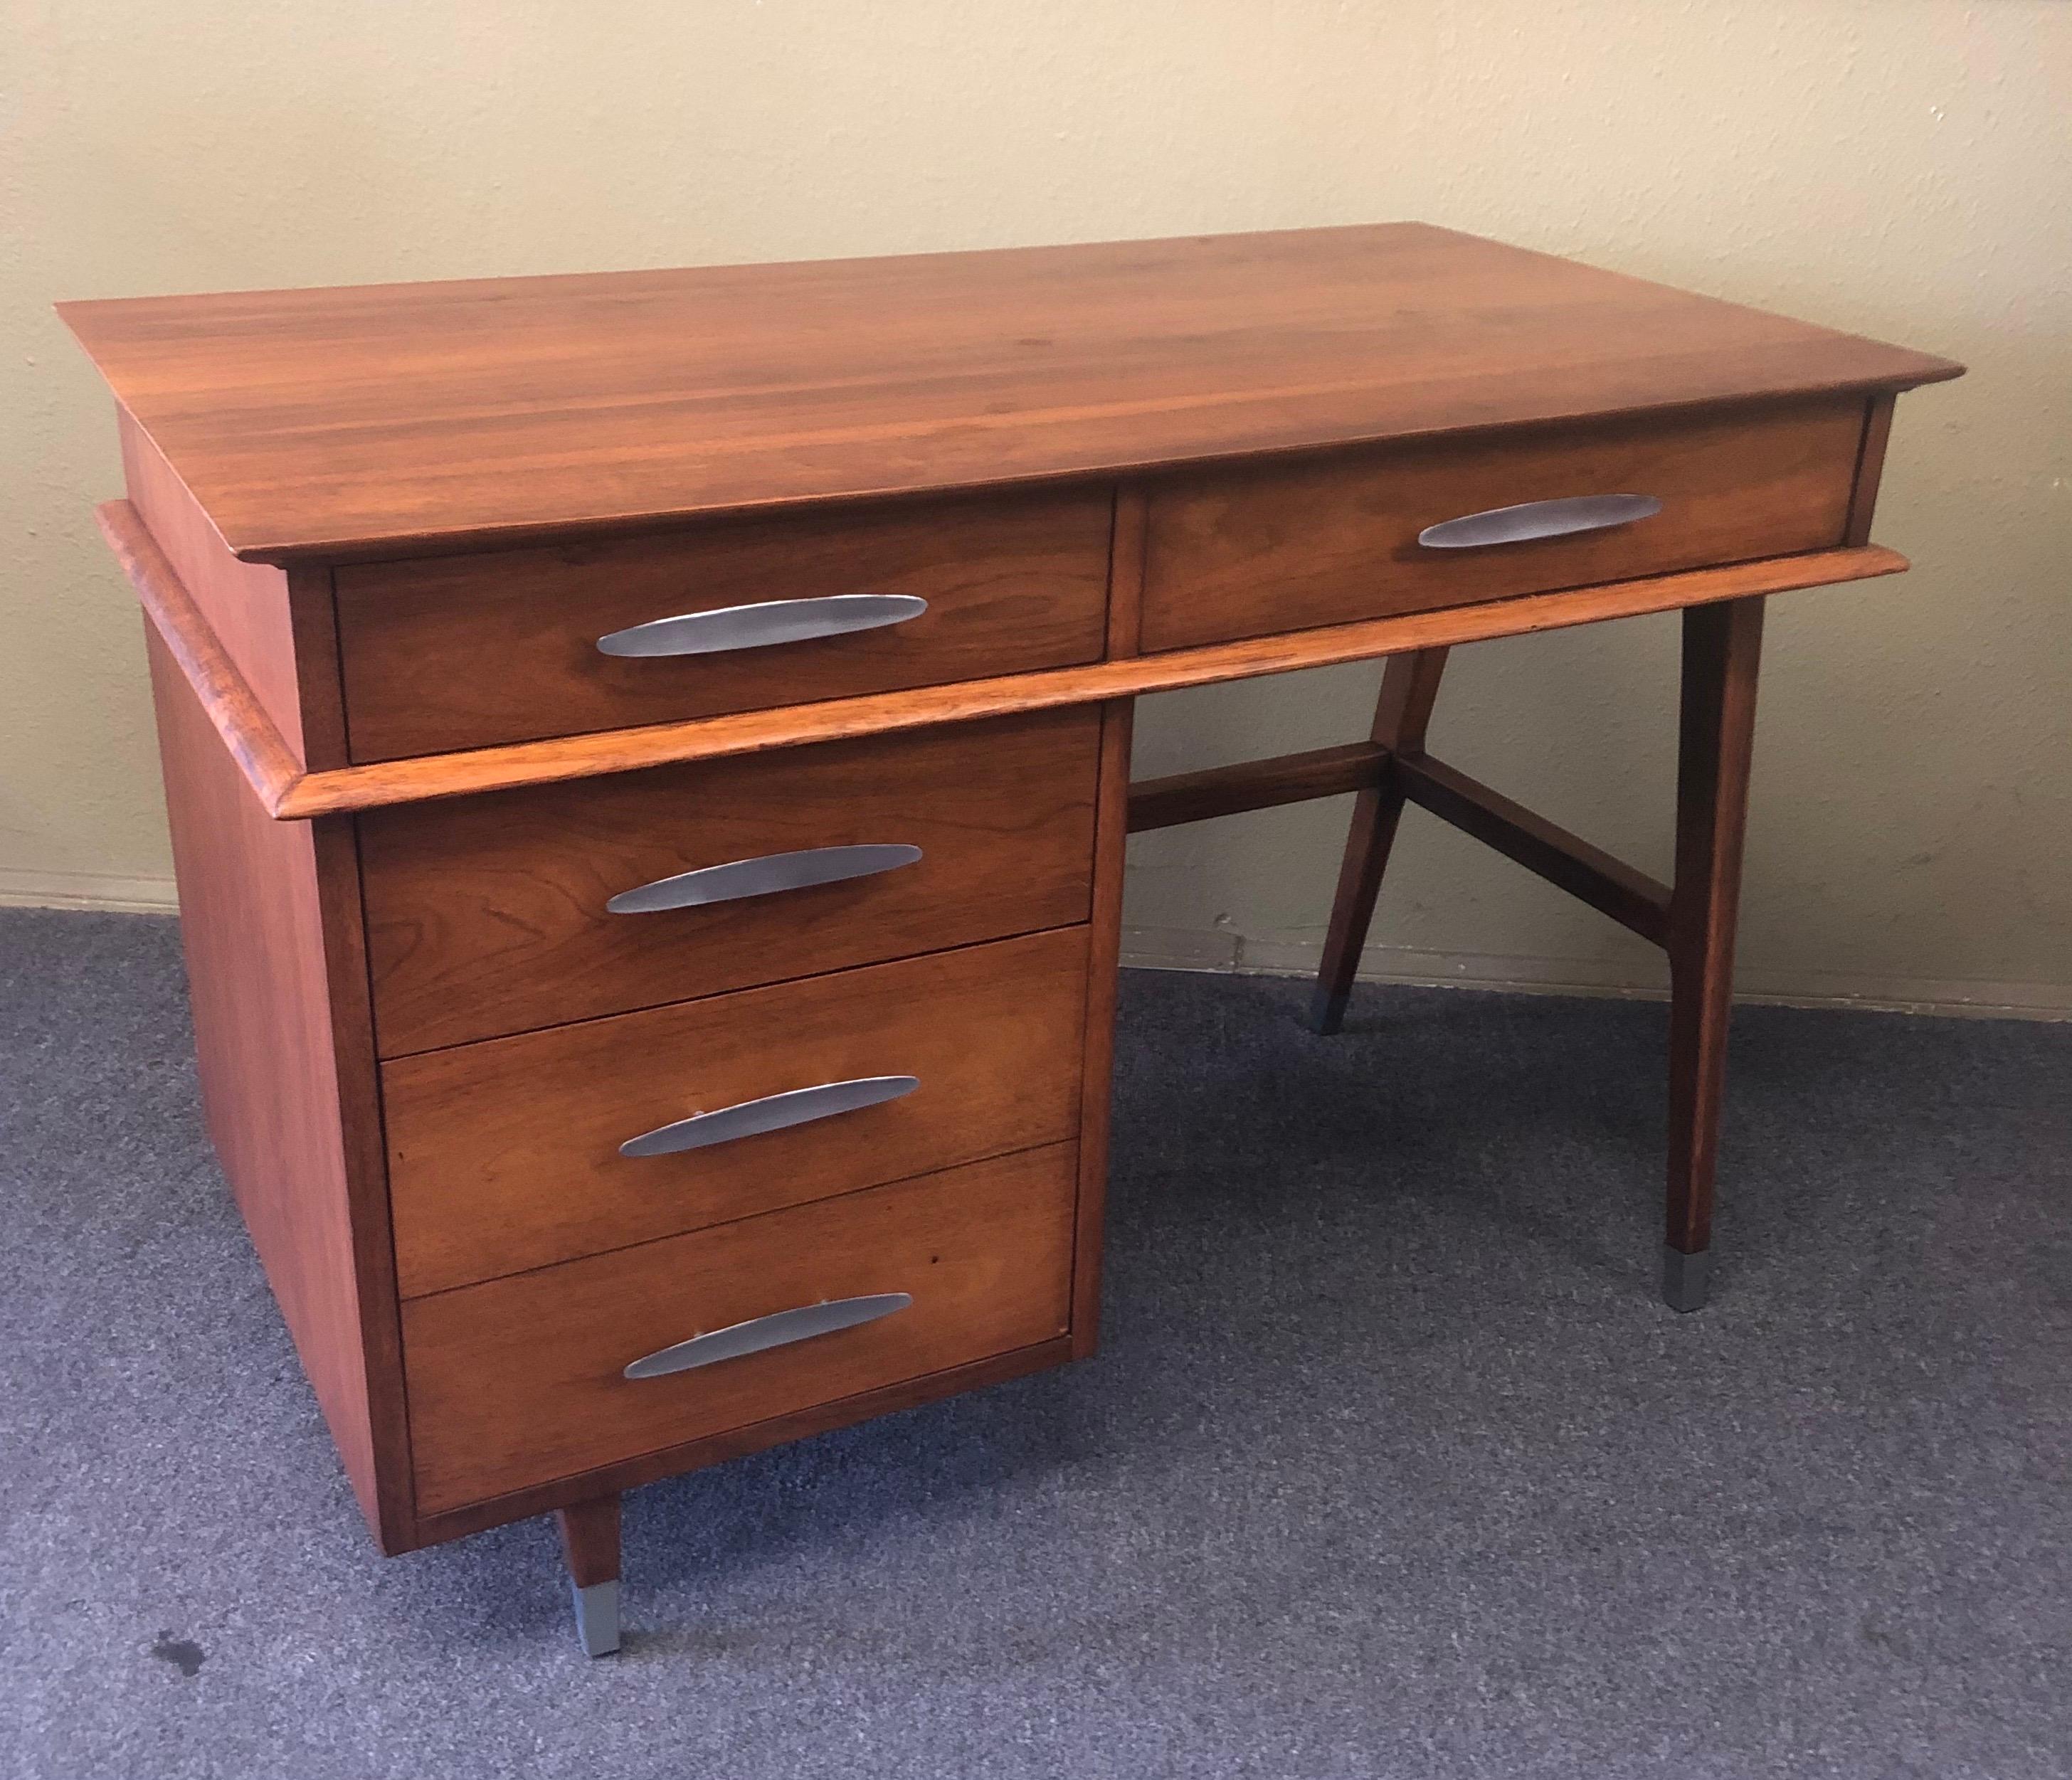 Mid-Century Modern four-drawer walnut writing desk with metal pulls and leg caps by Sligh-Lowry of Holland. MI, circa 1960s. The desk is finished on all sides and can be floated in the center of any room. The piece is in very good vintage condition